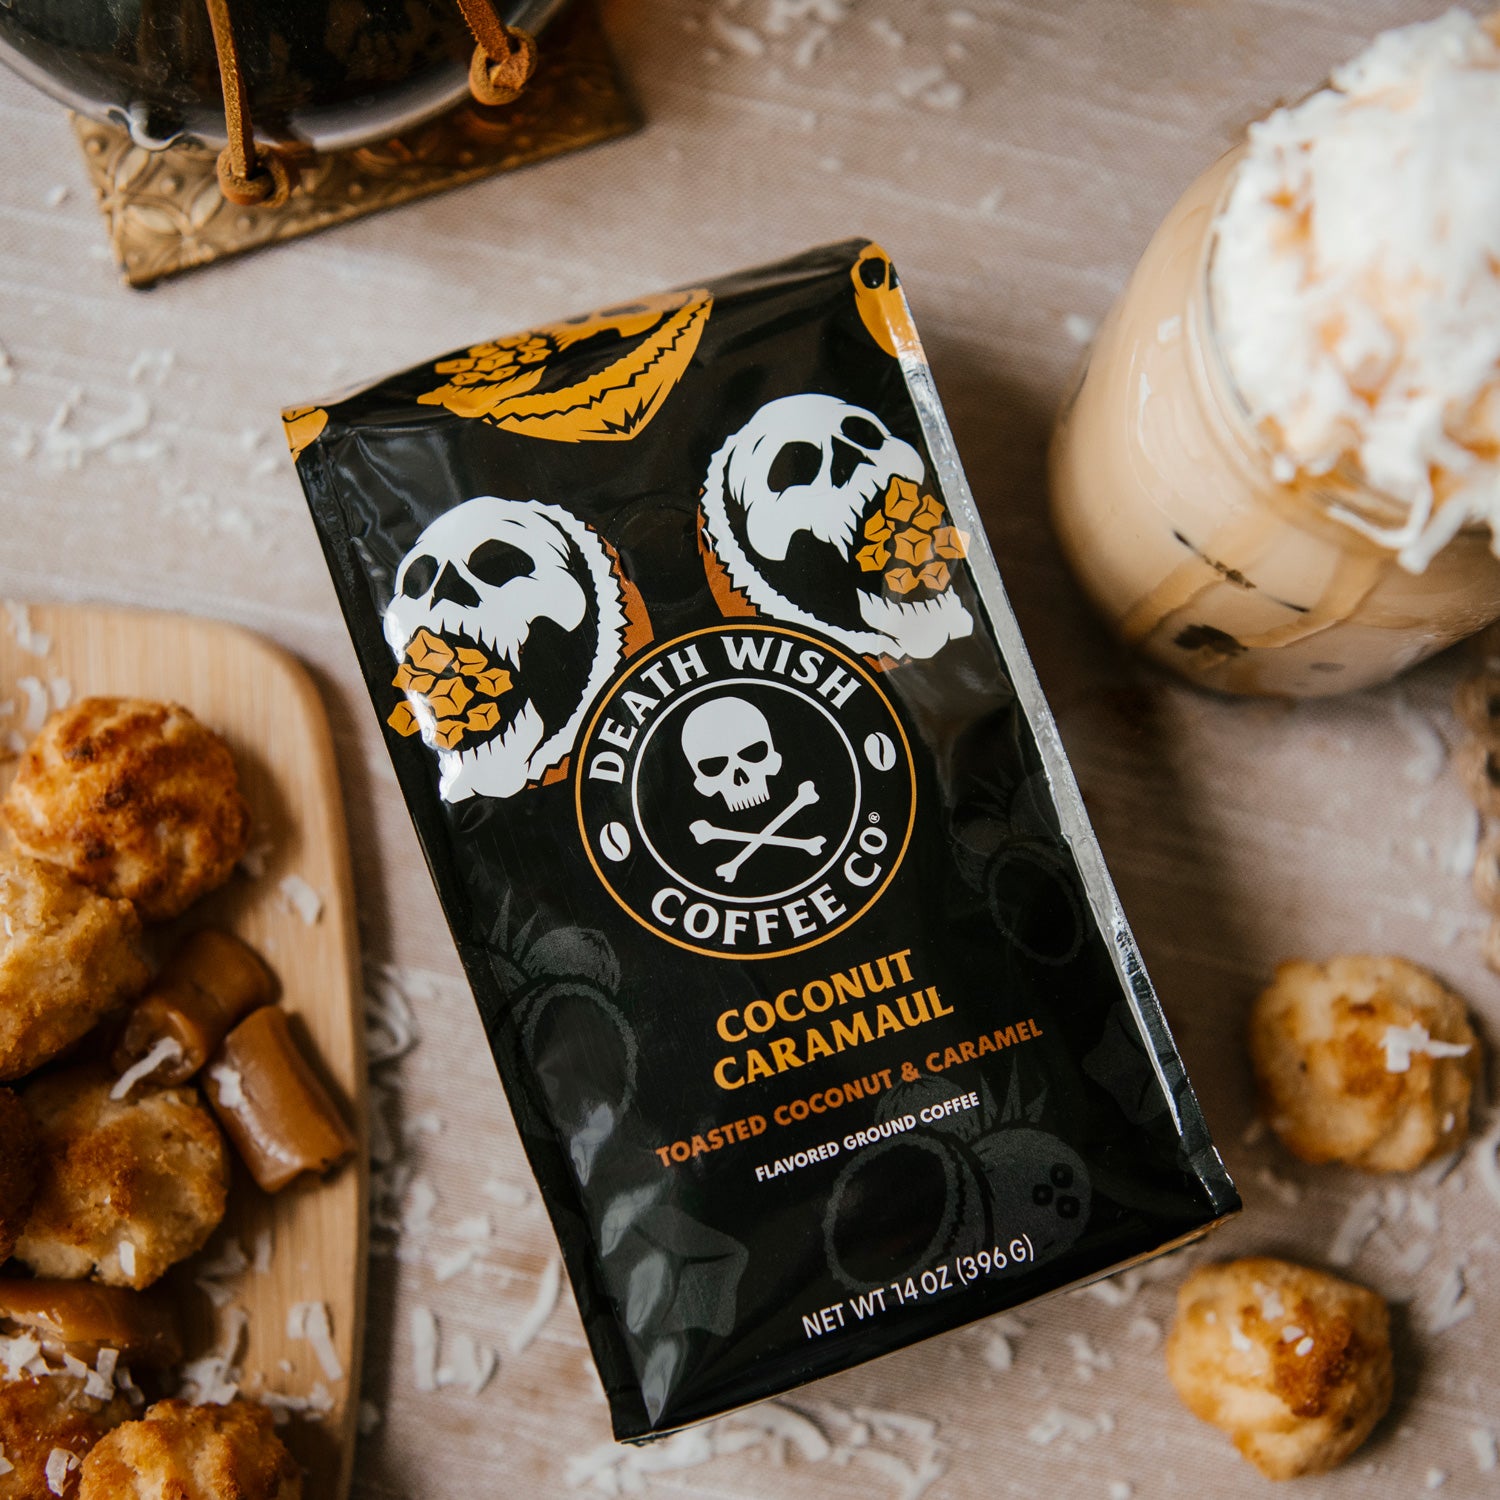 Death Wish Coffee Coconut Caramaul Flavored Coffee surrounded by pieces of caramel, coconut and other sweet treats.